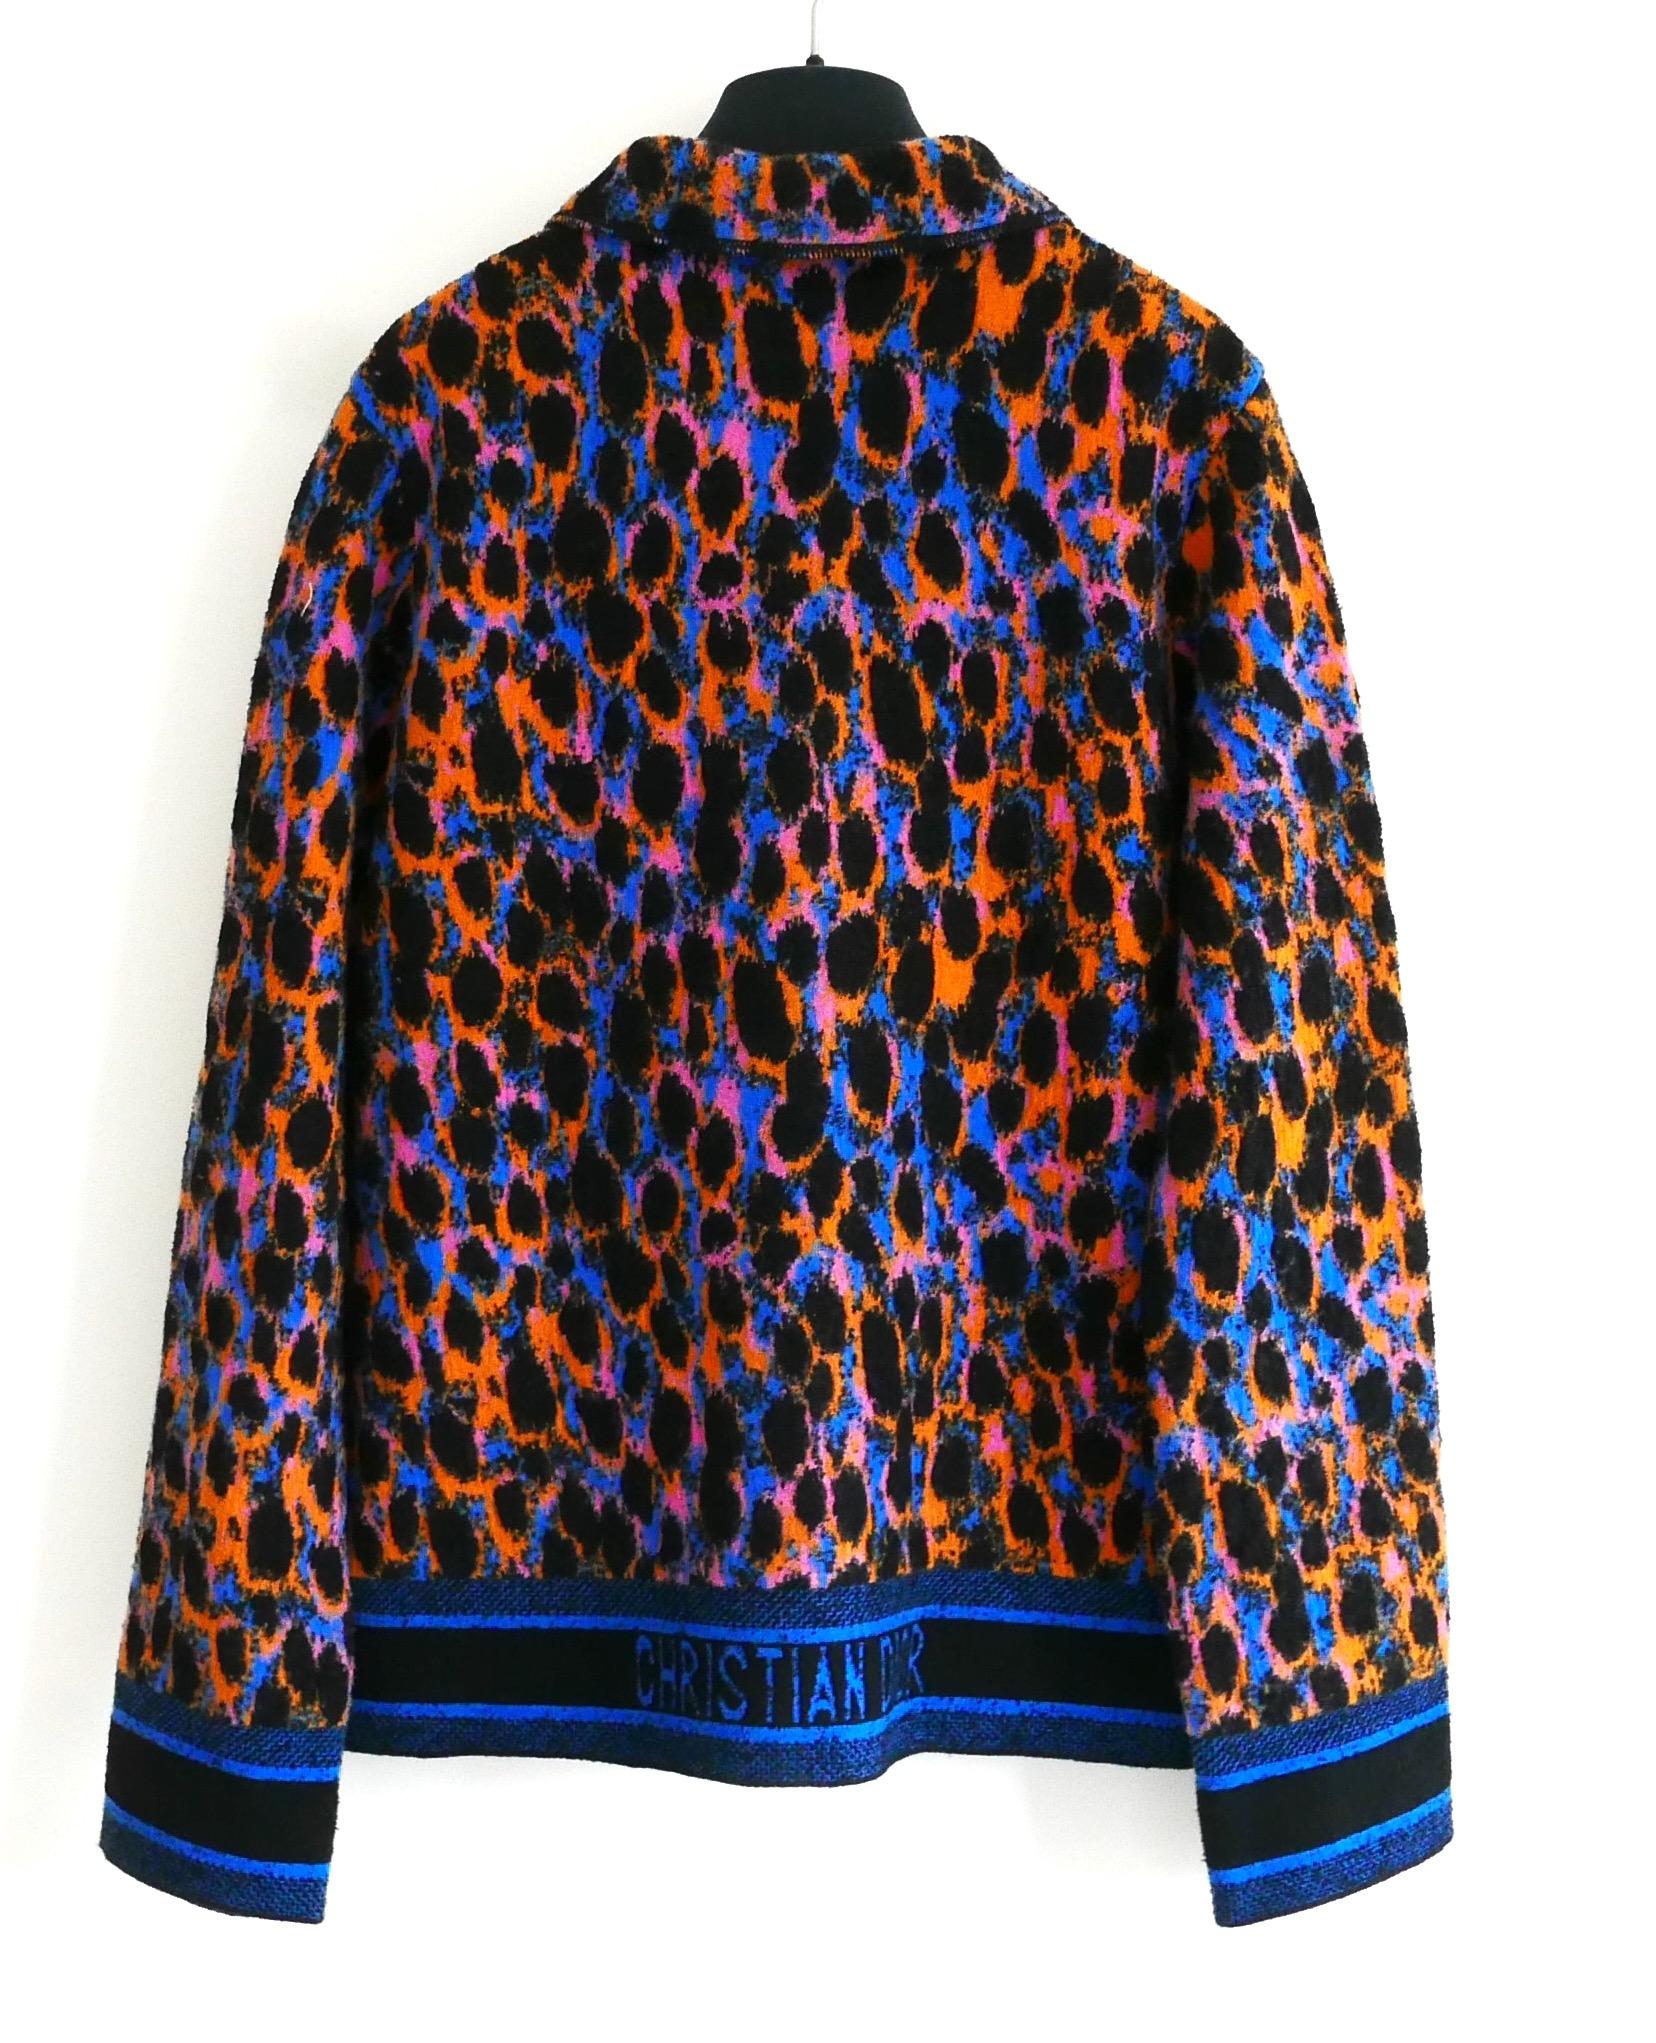 Dior SS22 Leopard Neon Logo Wool Jacket In New Condition For Sale In London, GB